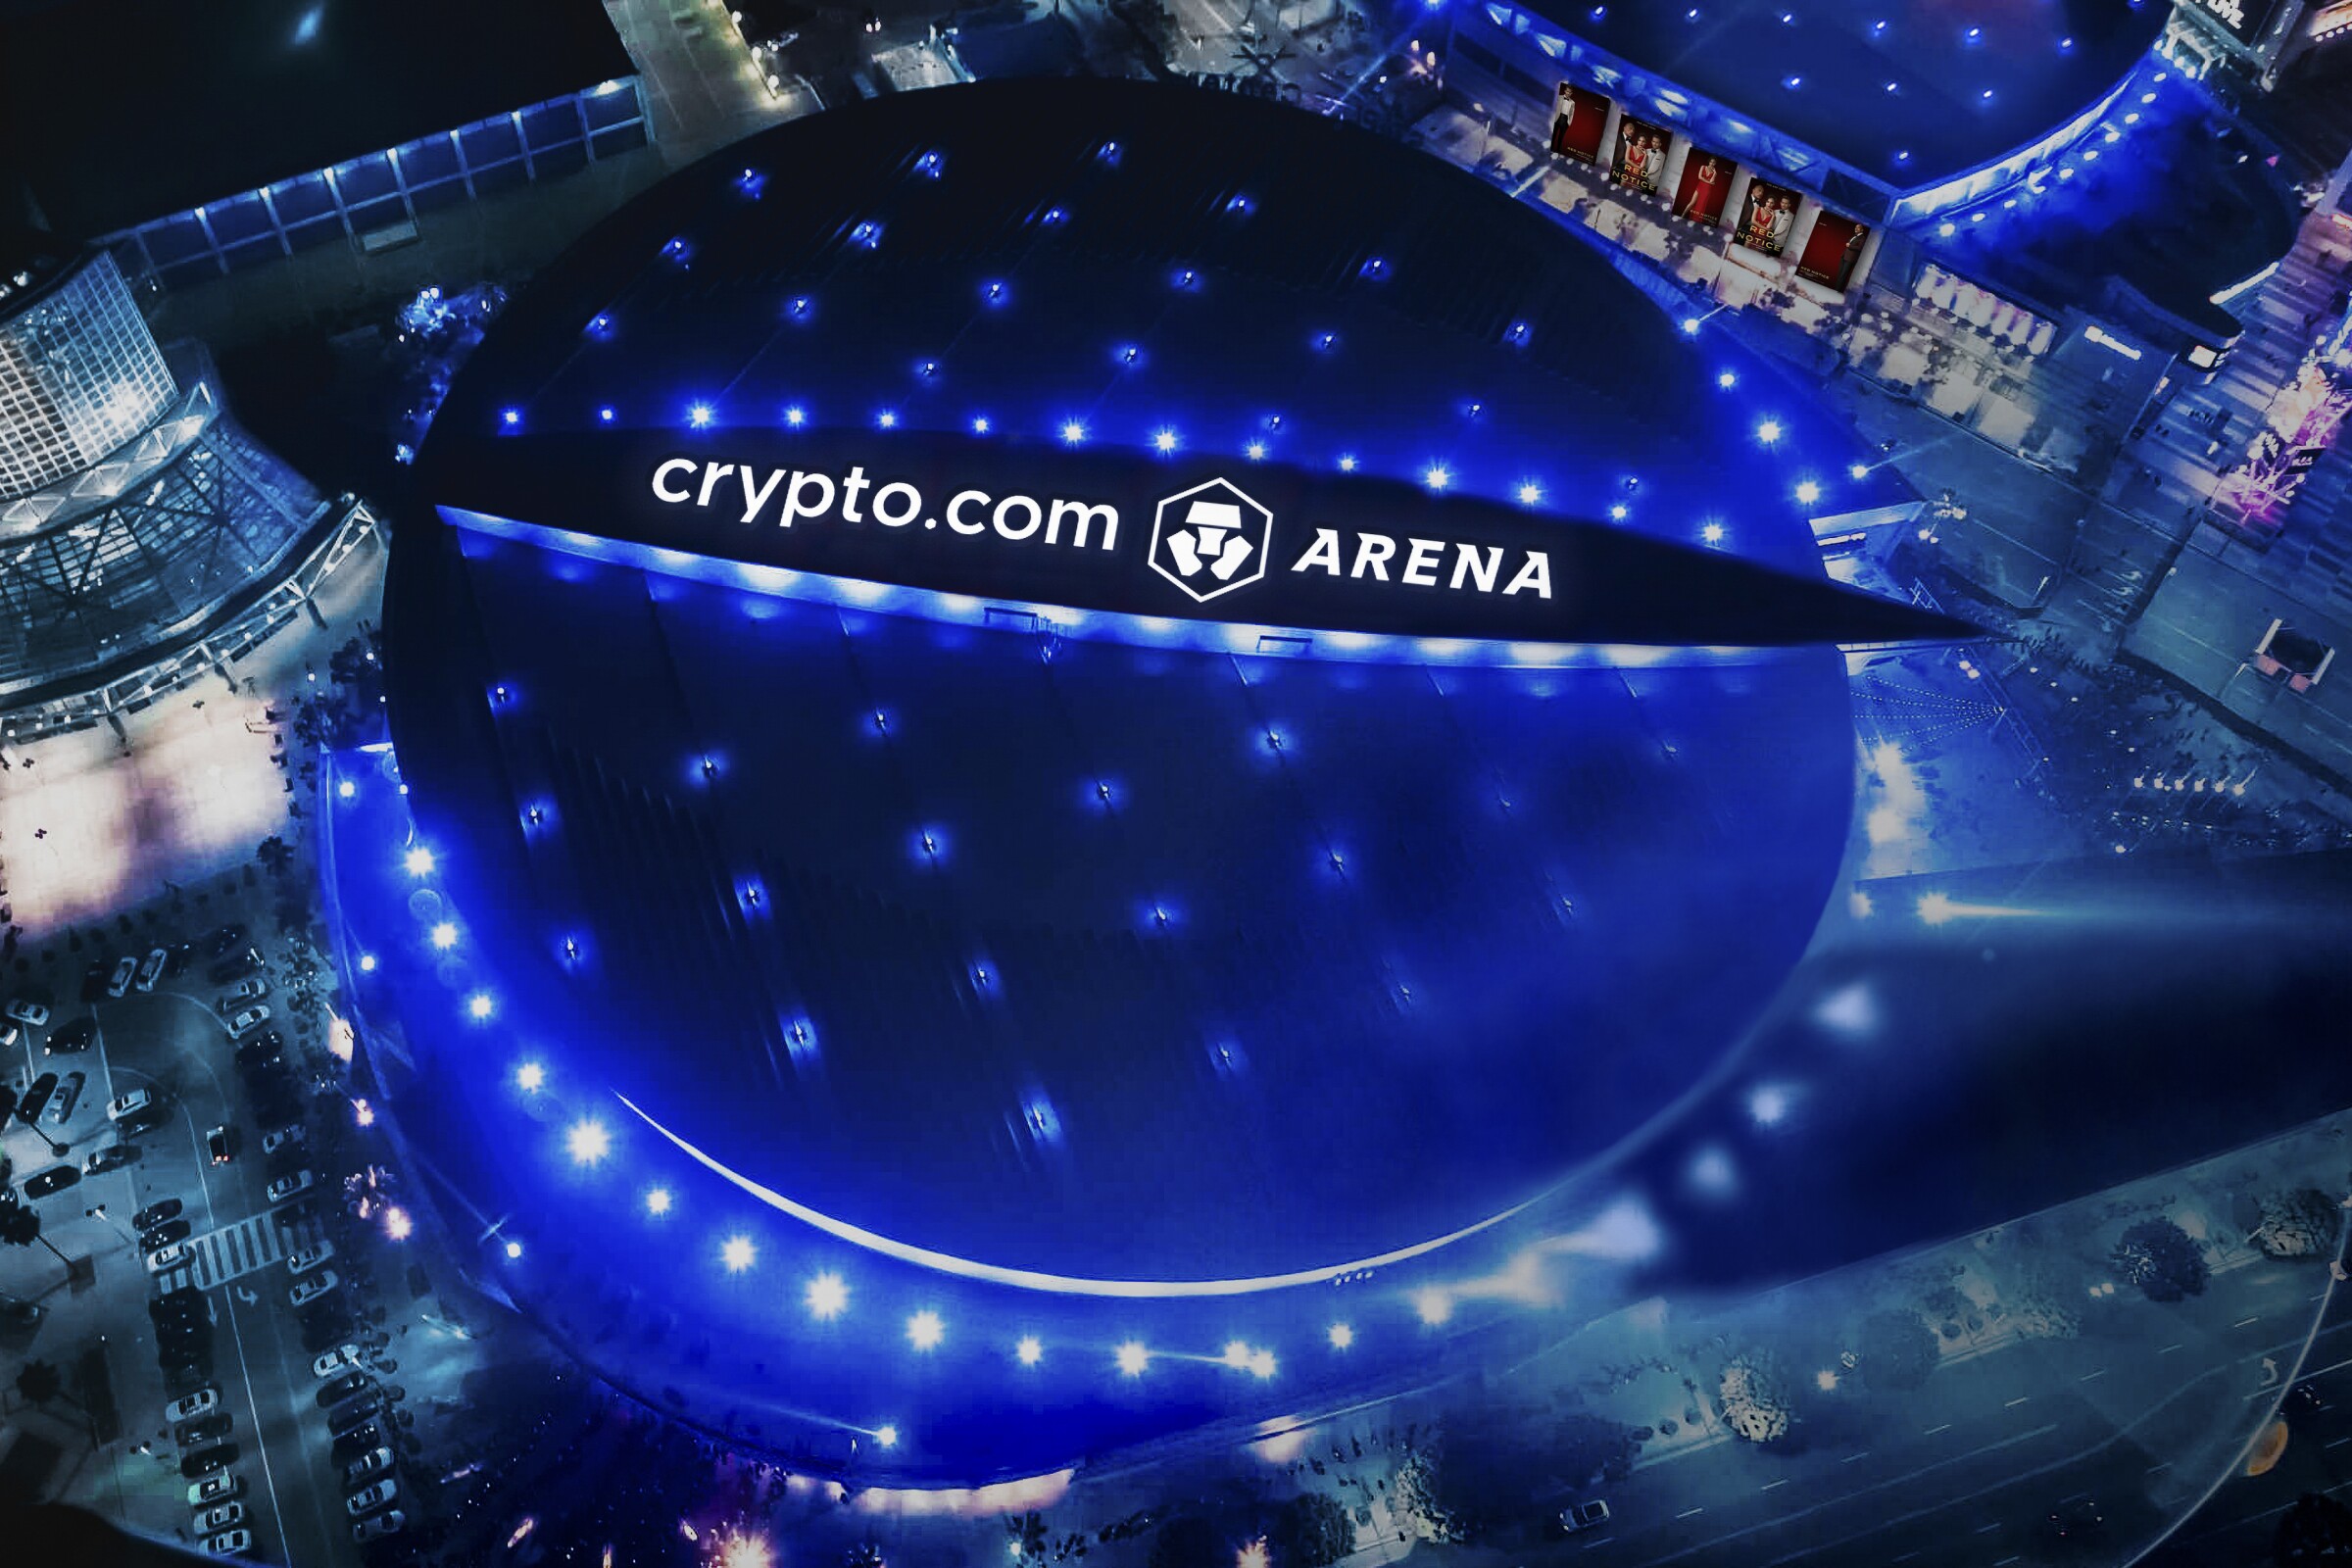 Is Crypto.com Arena (aka 'the Crypt') the best arena name? - Los Angeles  Times